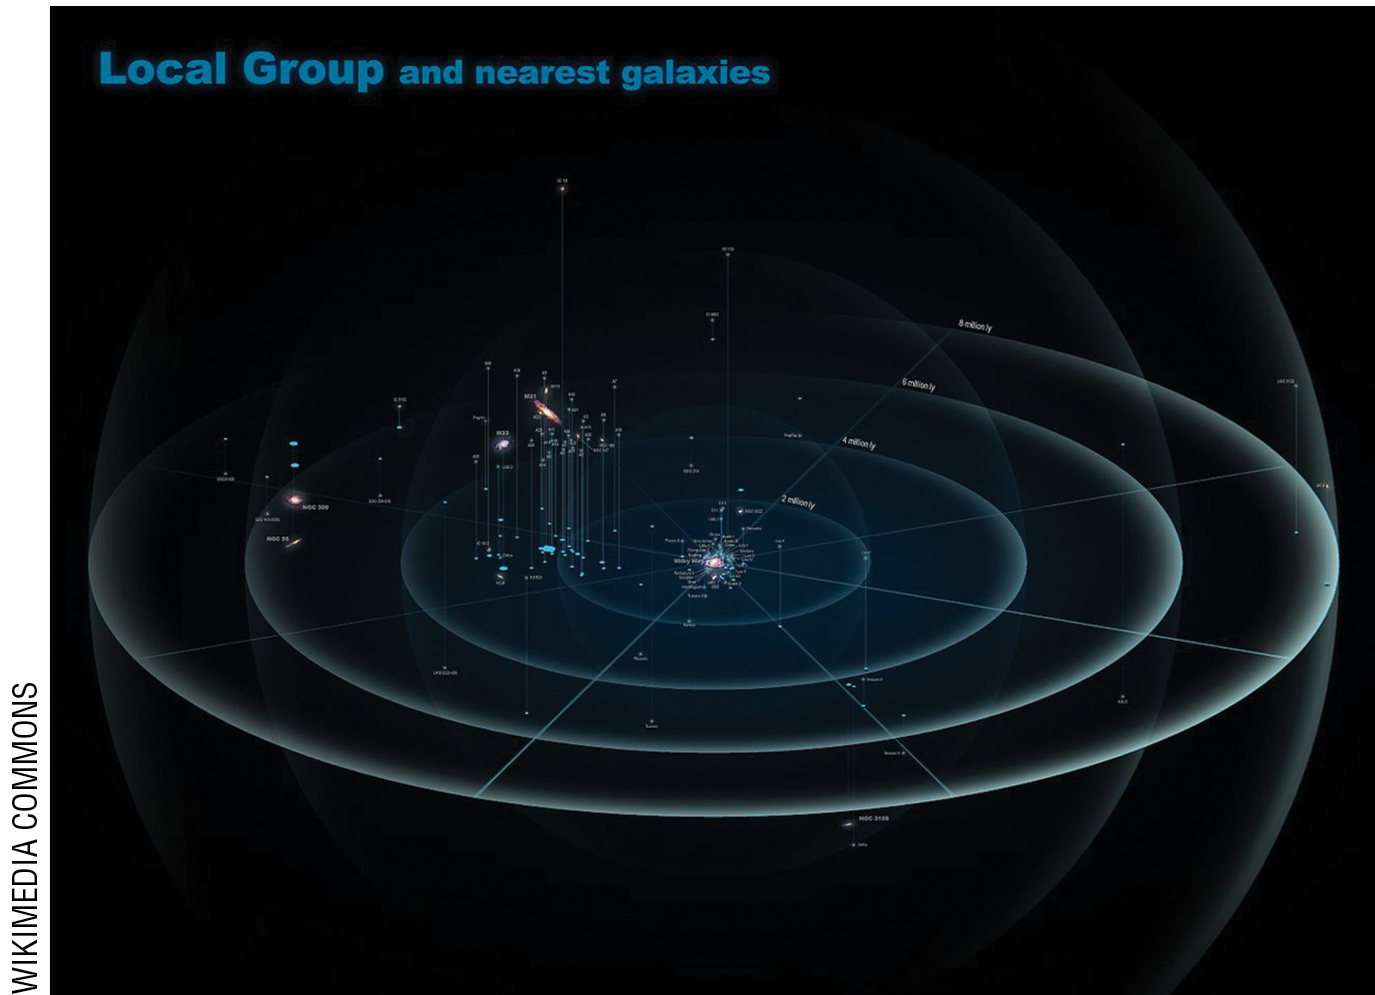 Figure 1  Local group and nearest galaxies.